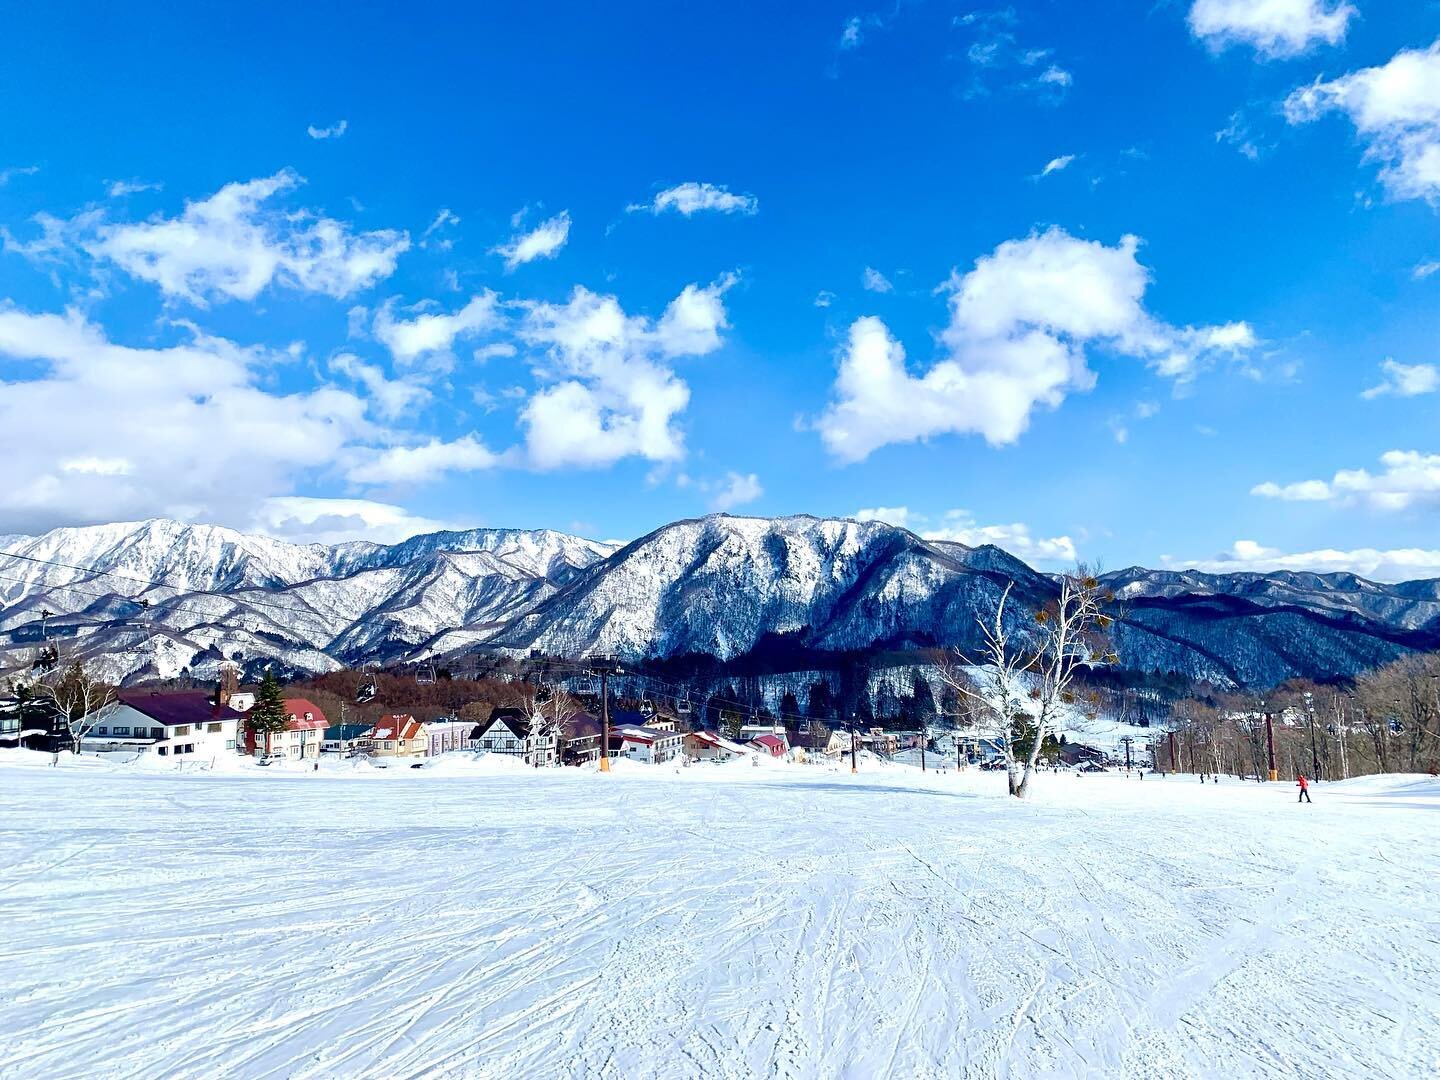 Good morning it&rsquo;s sunny today! 🌞 
Last night&rsquo;s snow falls make slope conditions better ❄️
.
📷another sunny day at Tsugaike🌞
.
#tsugaikekogen 
#白馬村 #信州 #旅行 #冬旅 #長野県観光 #旅行好きな人と繋がりたい #❄️ #スキーすきな人と繋がりたい #スノボすきな人と繋がりたい #skiholiday #japow #h